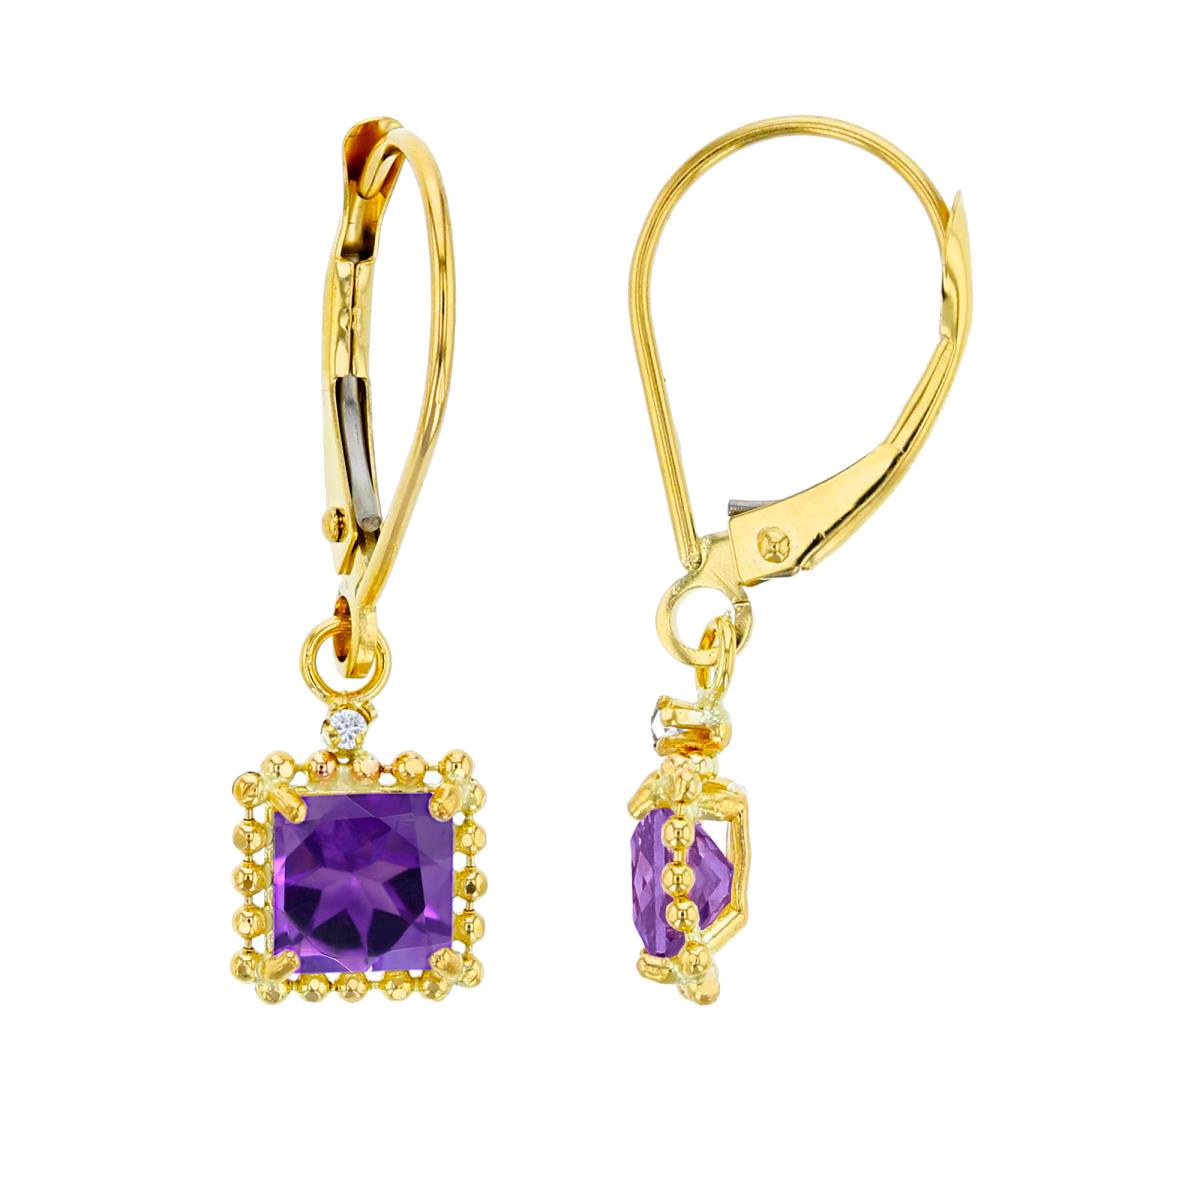 14K Yellow Gold 1.25mm Rd Created White Sapphire & 5mm Sq Amethyst Bead Frame Drop Lever-Back Earring